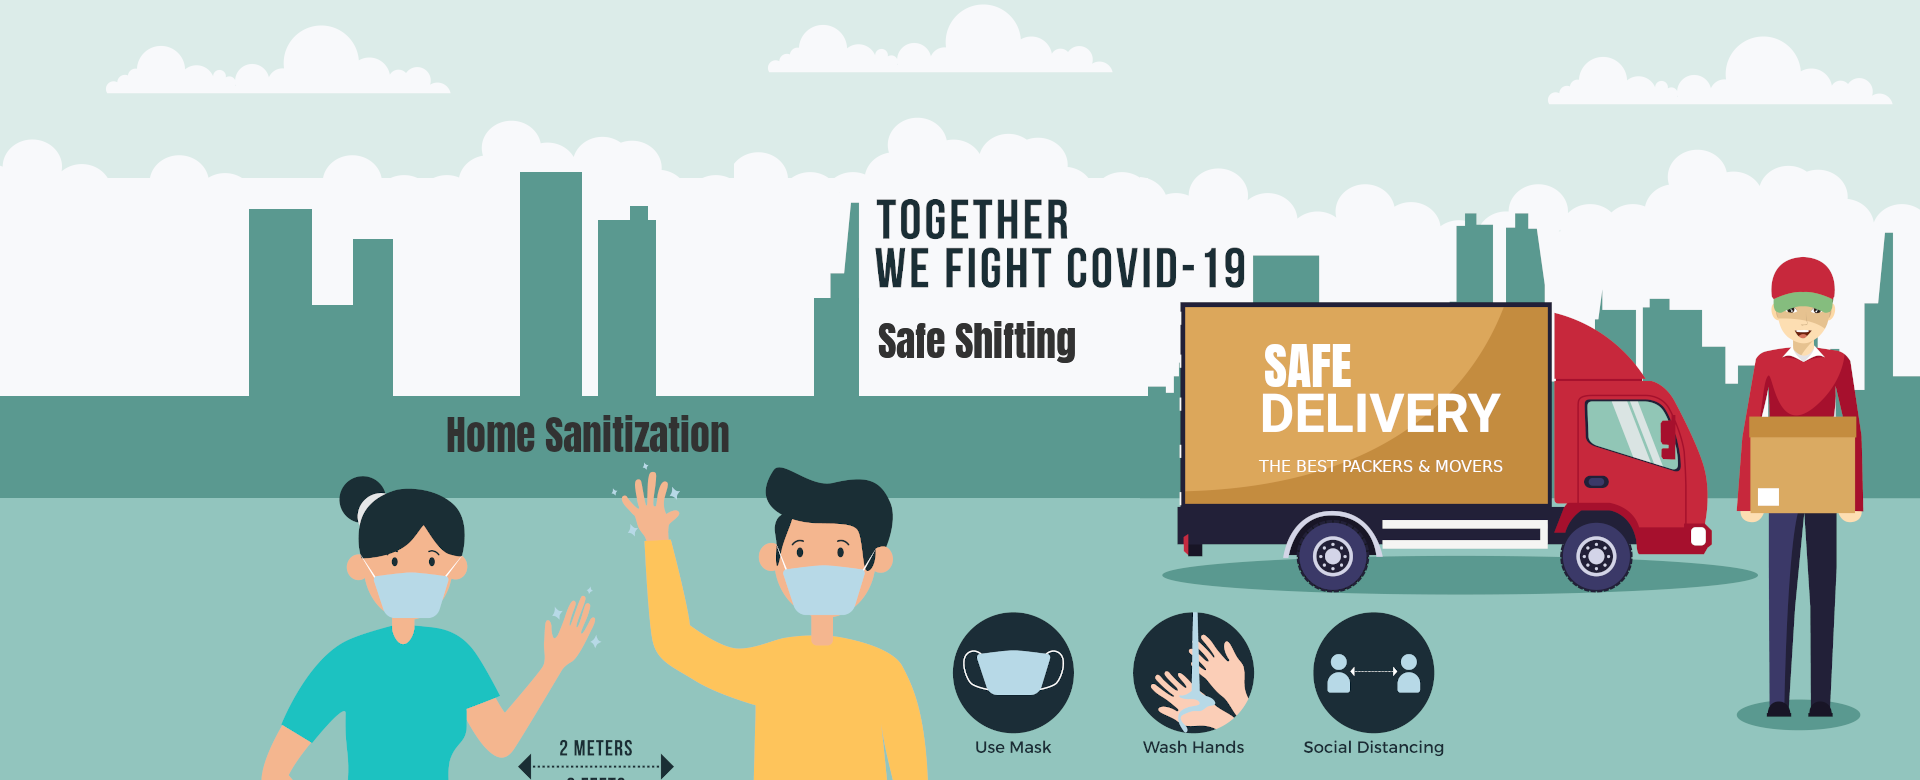 Shifting Services with extra support and resources for Coronavirus (COVID-19)s in Bangalore